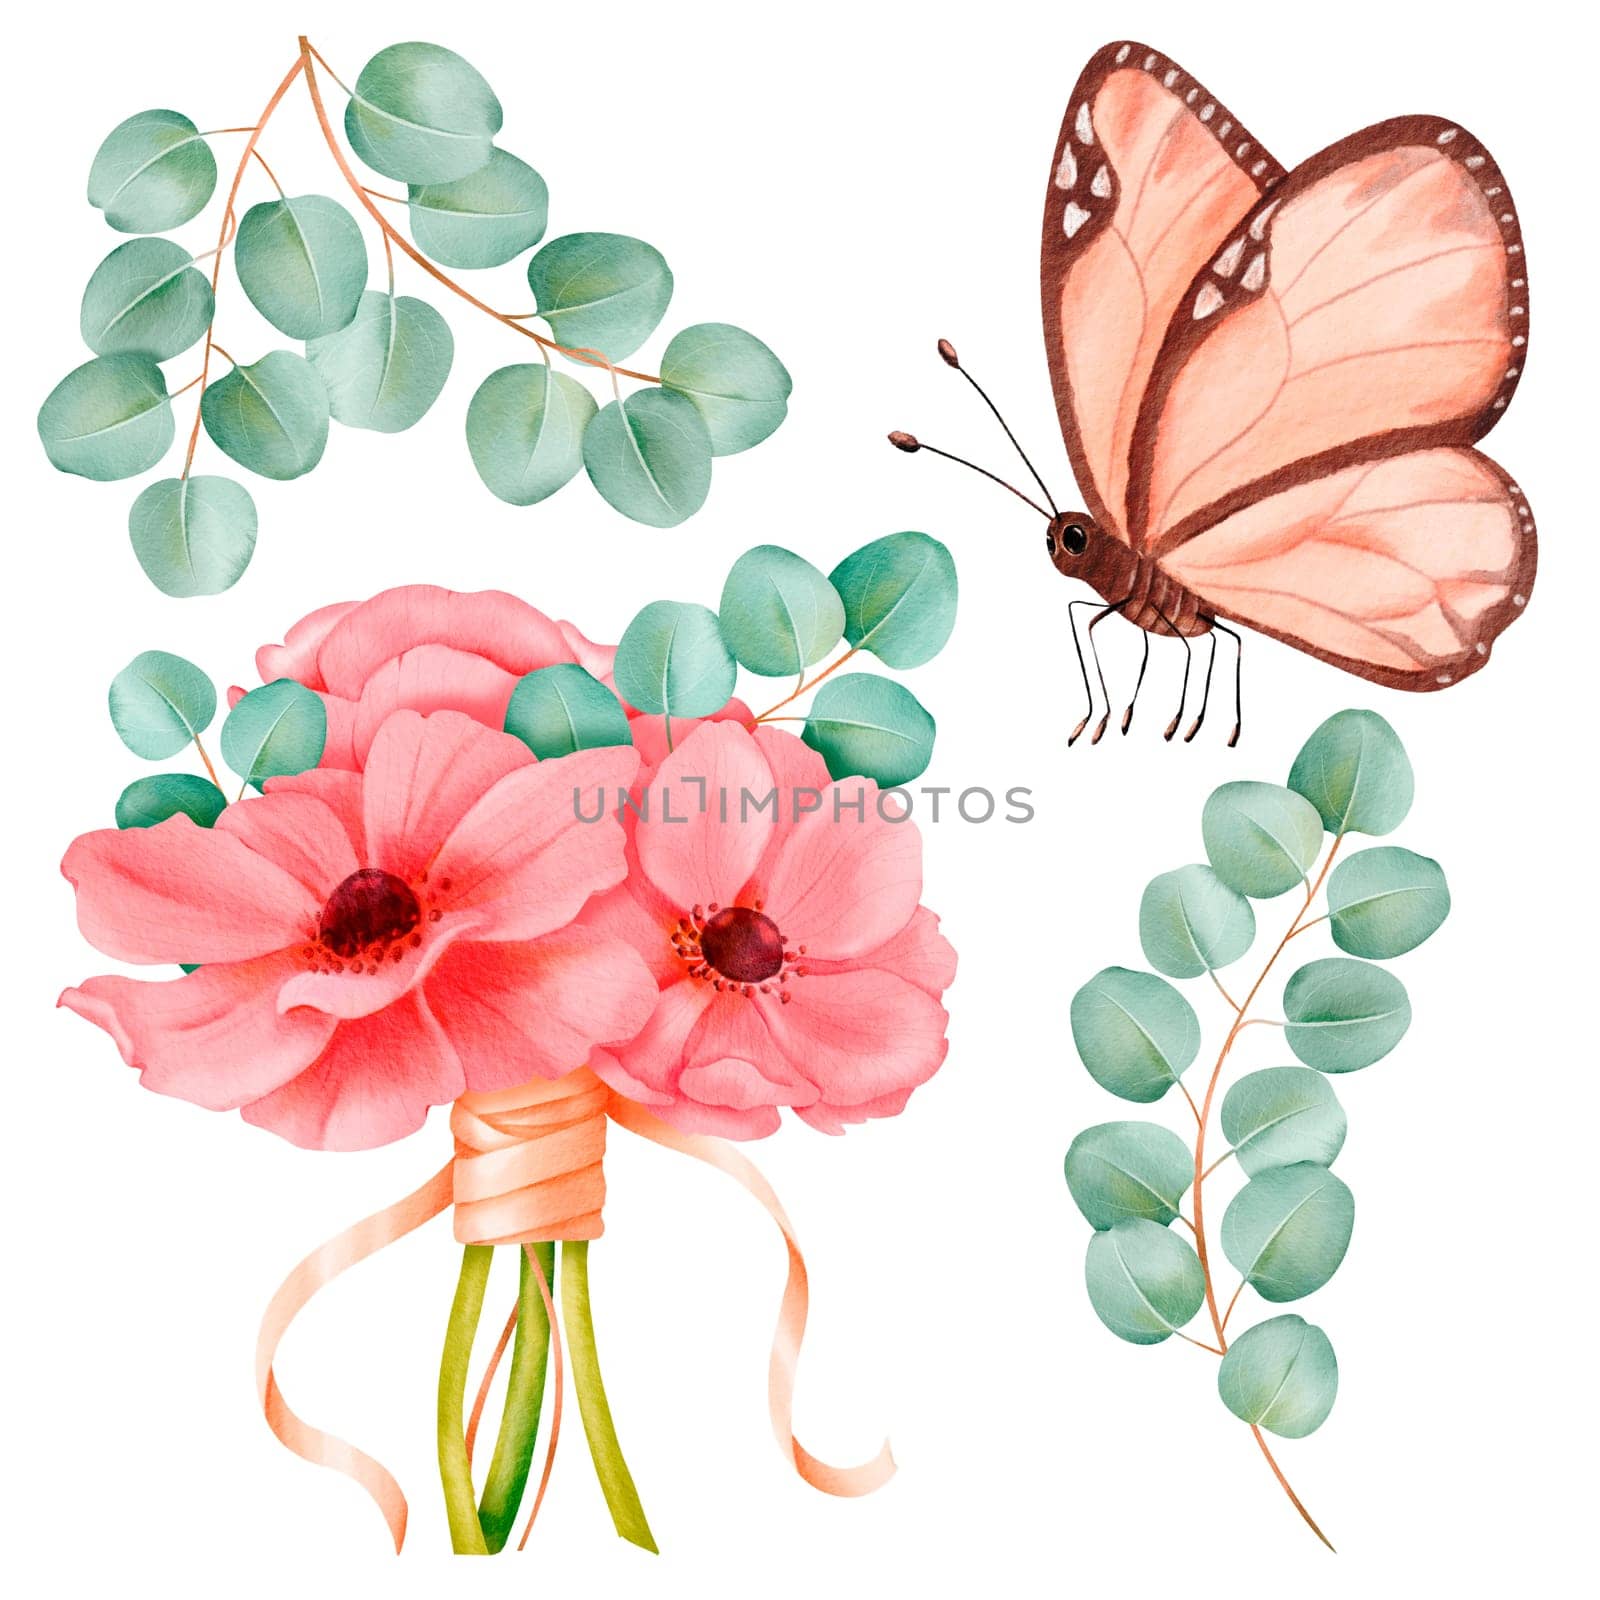 Watercolor set featuring a bouquet of pink anemones tied with a ribbon, adorned with a butterfly and eucalyptus branches. for greeting cards, stationery, wedding invitations and floral-themed designs.